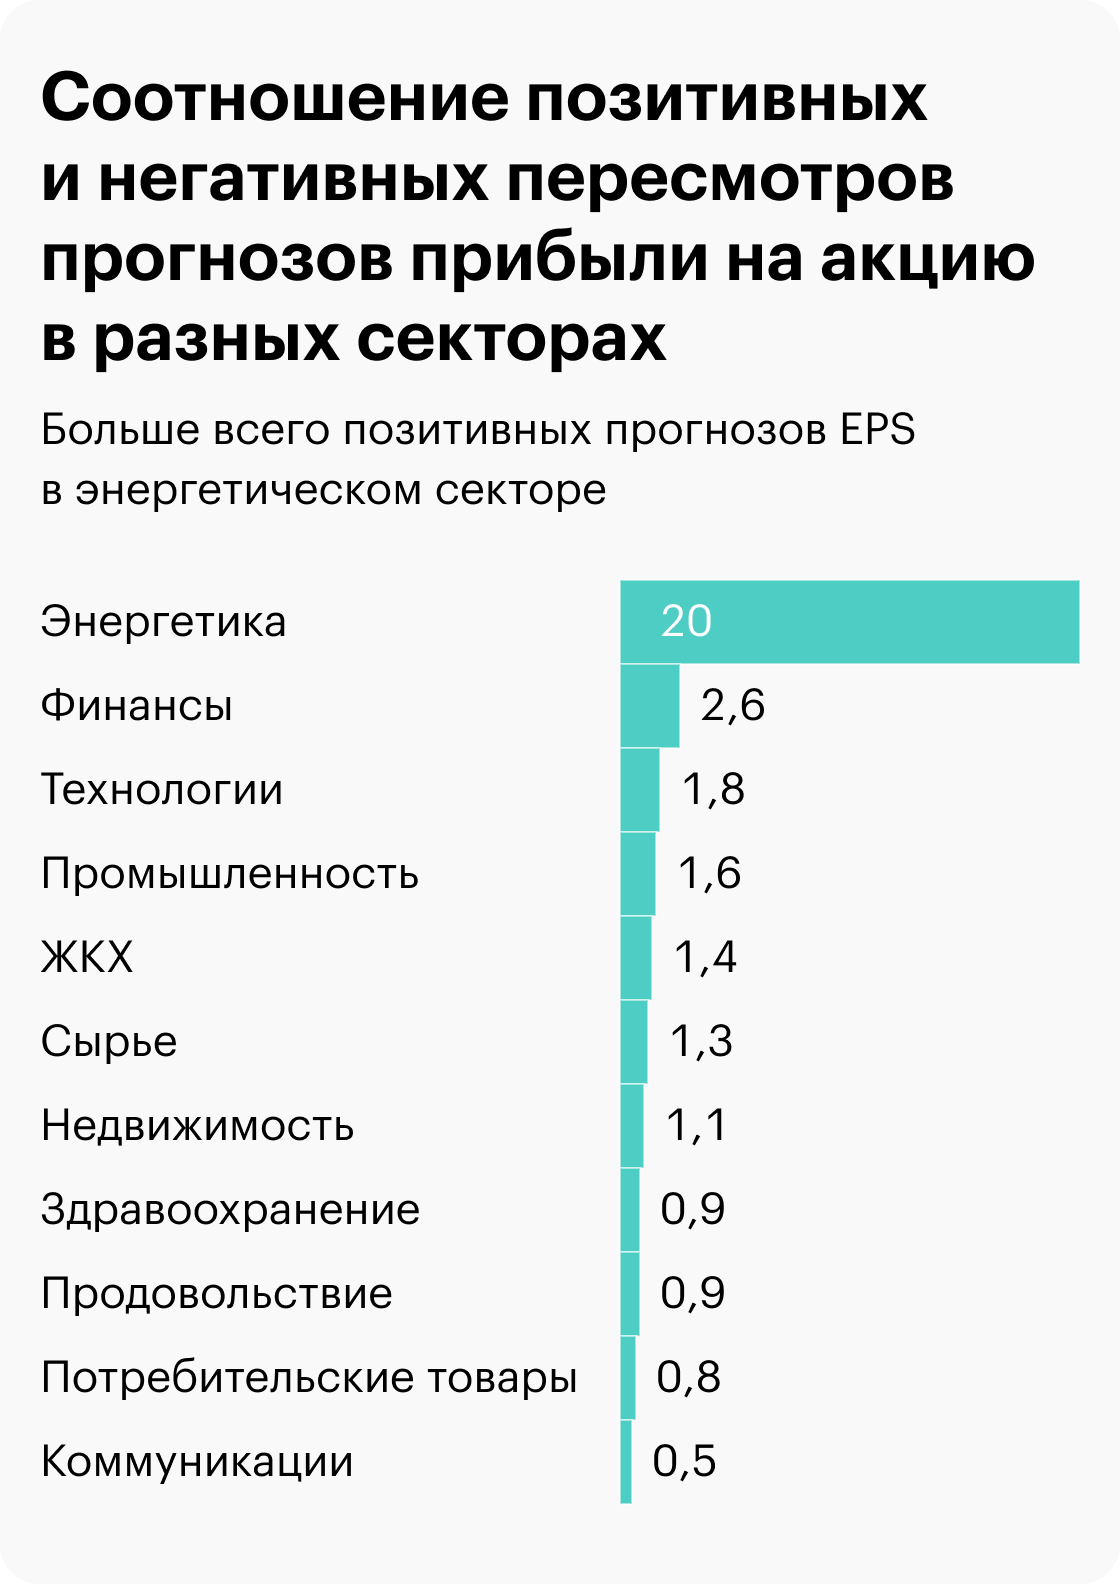 Источник: Daily Shot, The&nbsp;ratio of upward to downward EPS revisions by sector